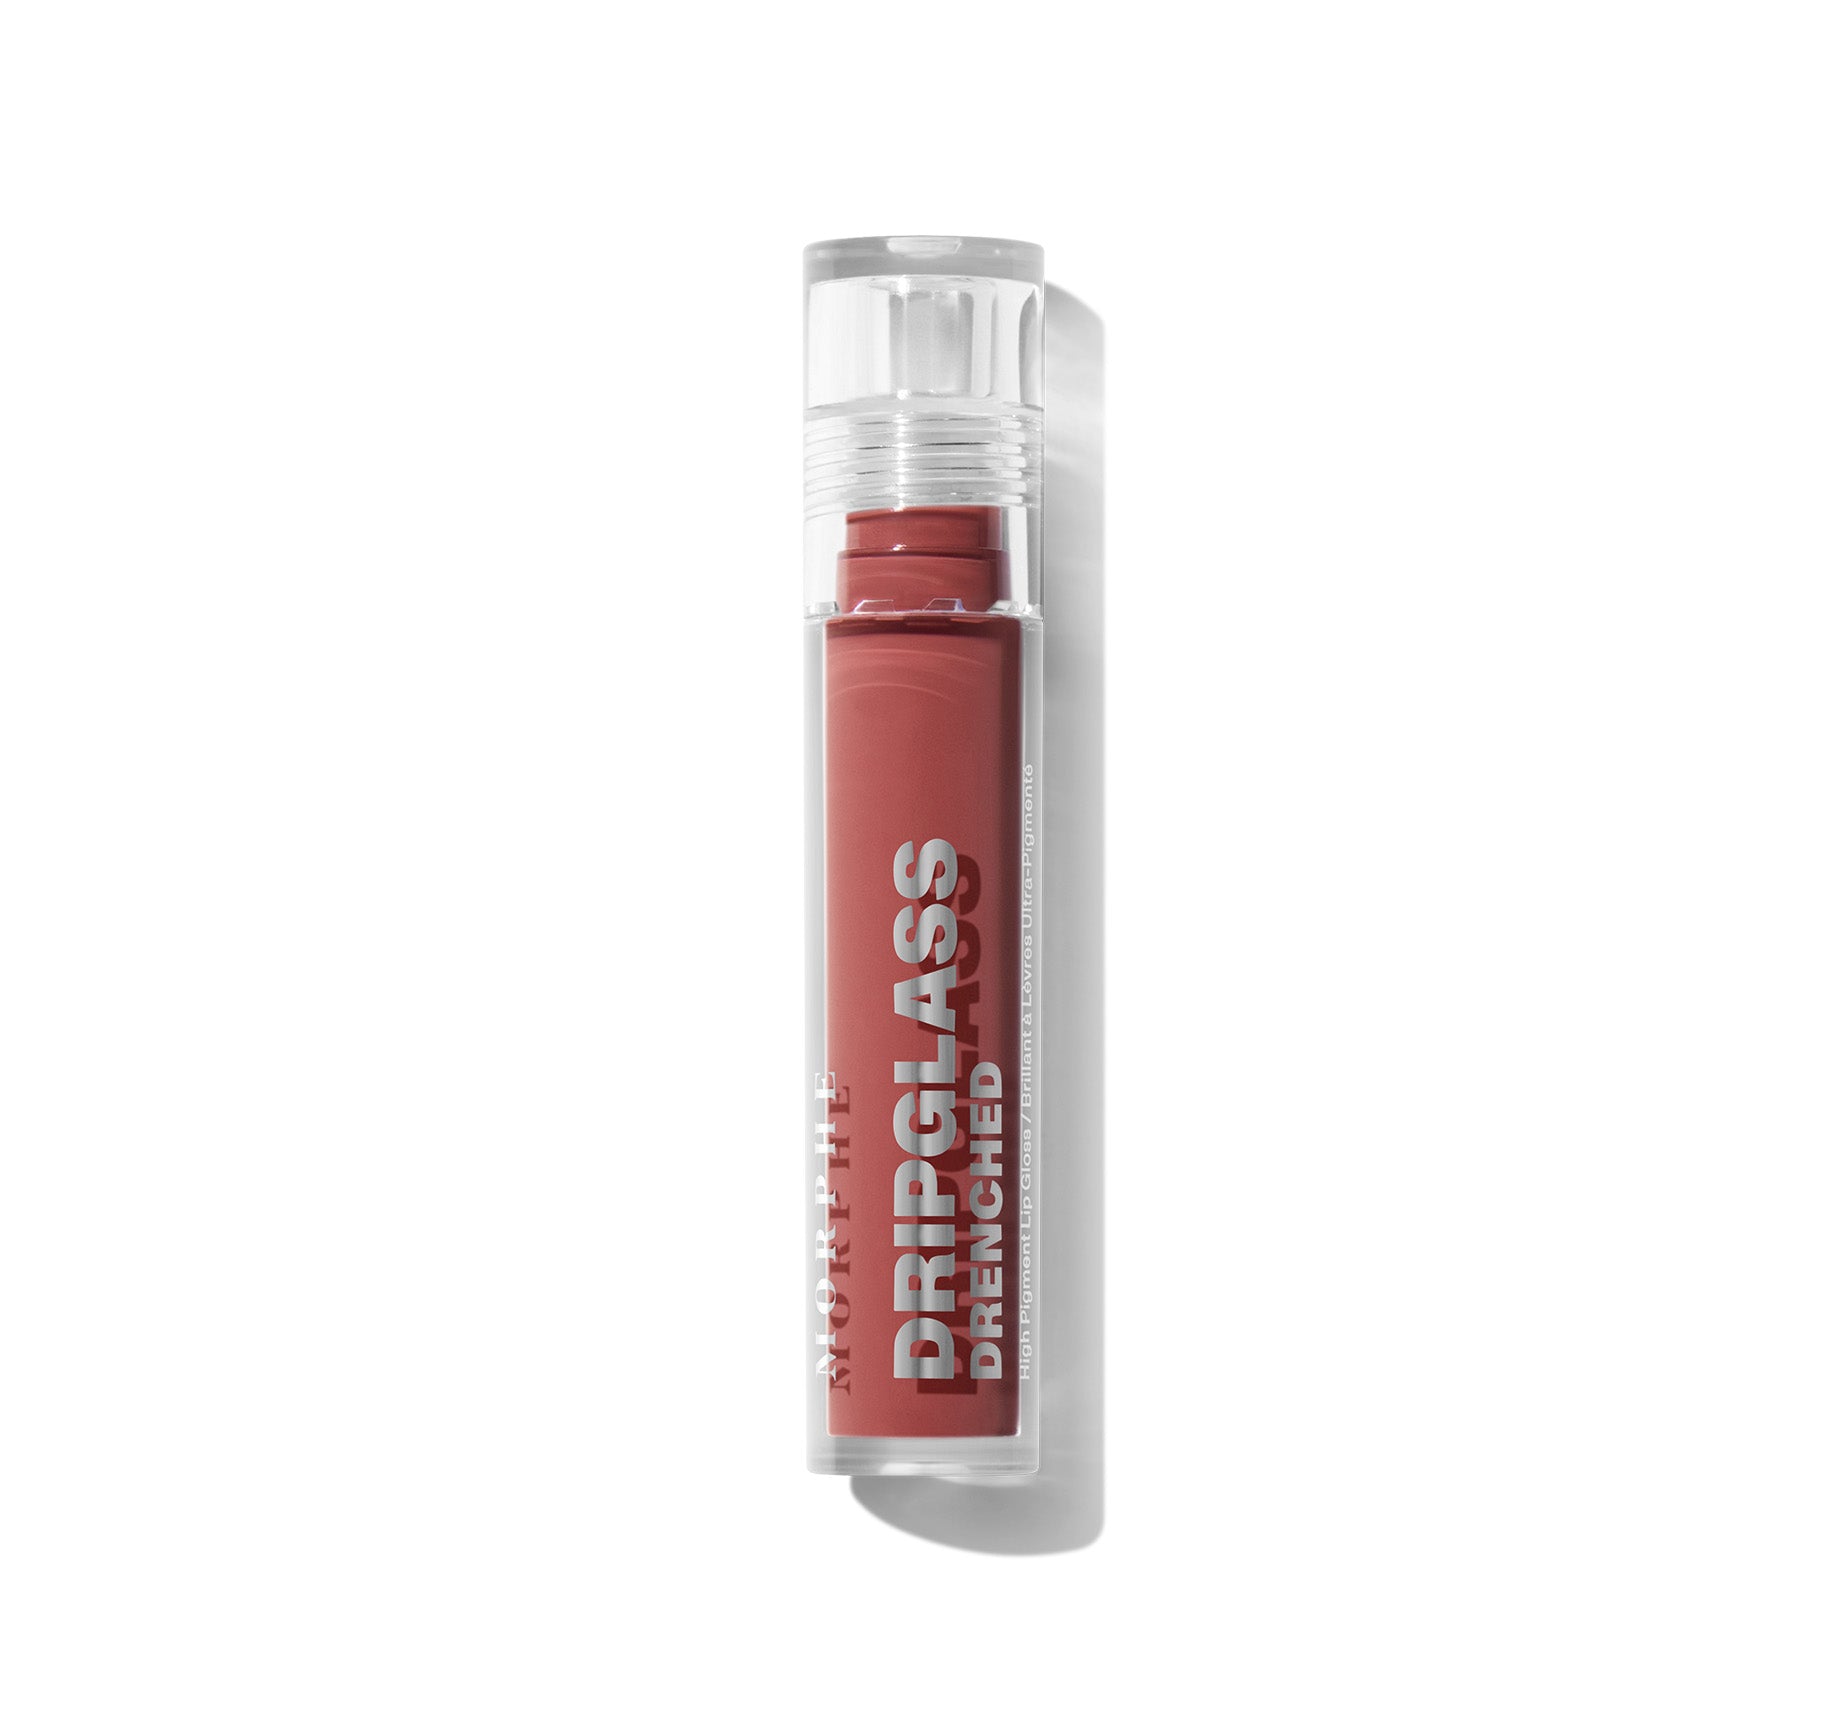 Dripglass Drenched High Pigment Lip Gloss - Deep Brick - Image 5